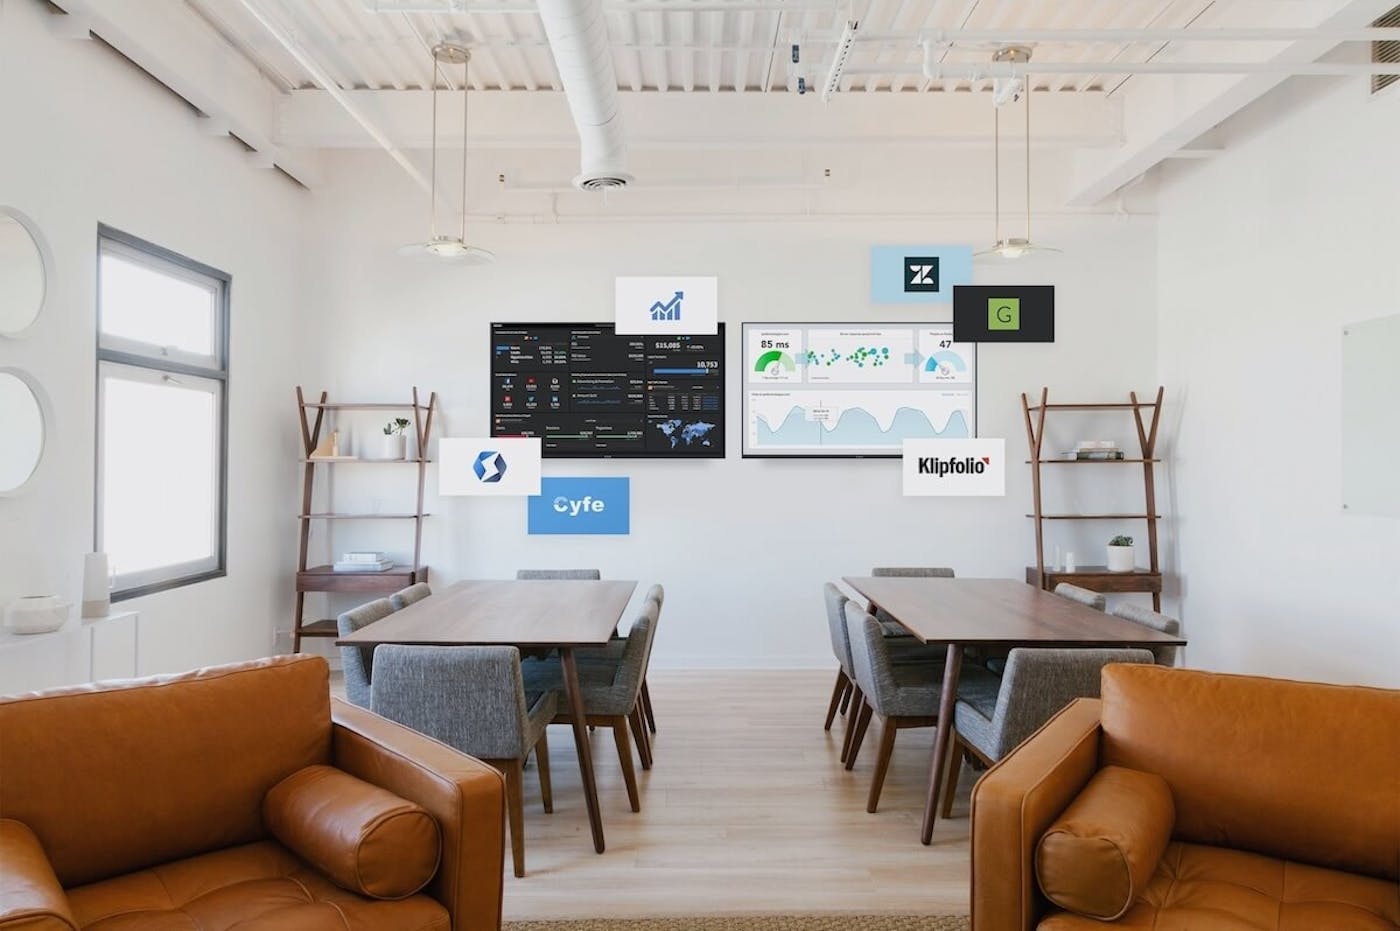 ScreenCloud Article - 10 ways for technology startups to use digital signage